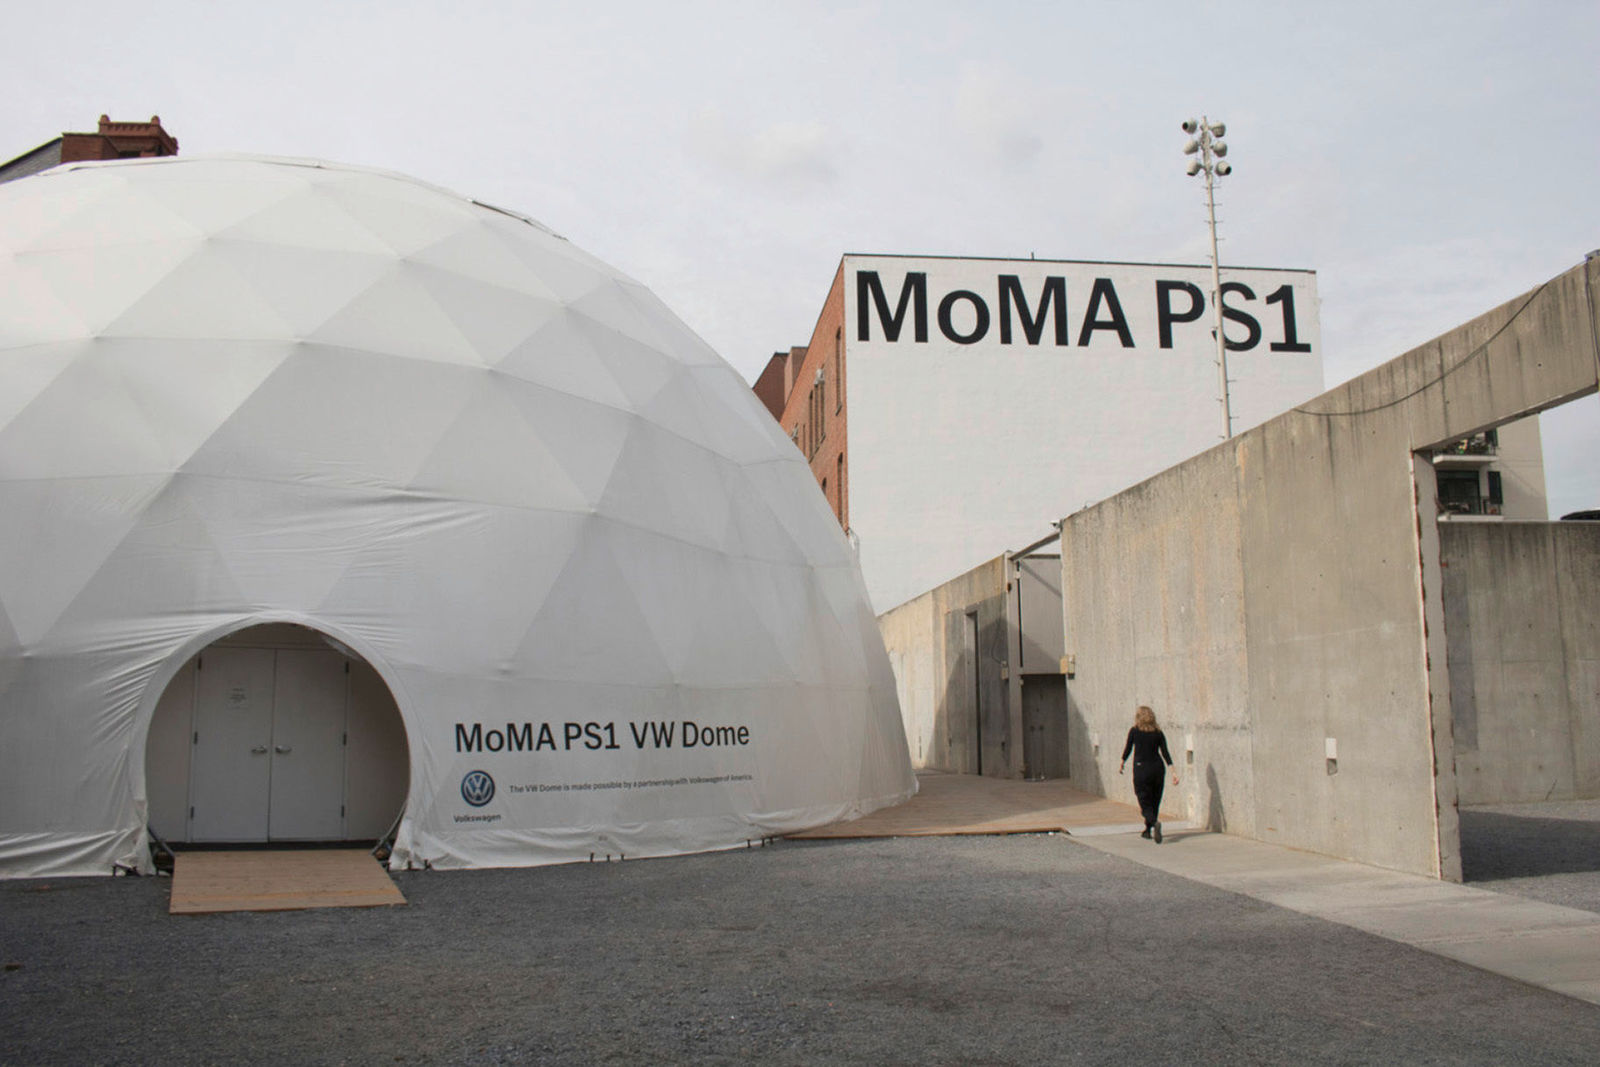 The new season begins for Volkswagen Sunday Sessions at MoMA PS1 in New York